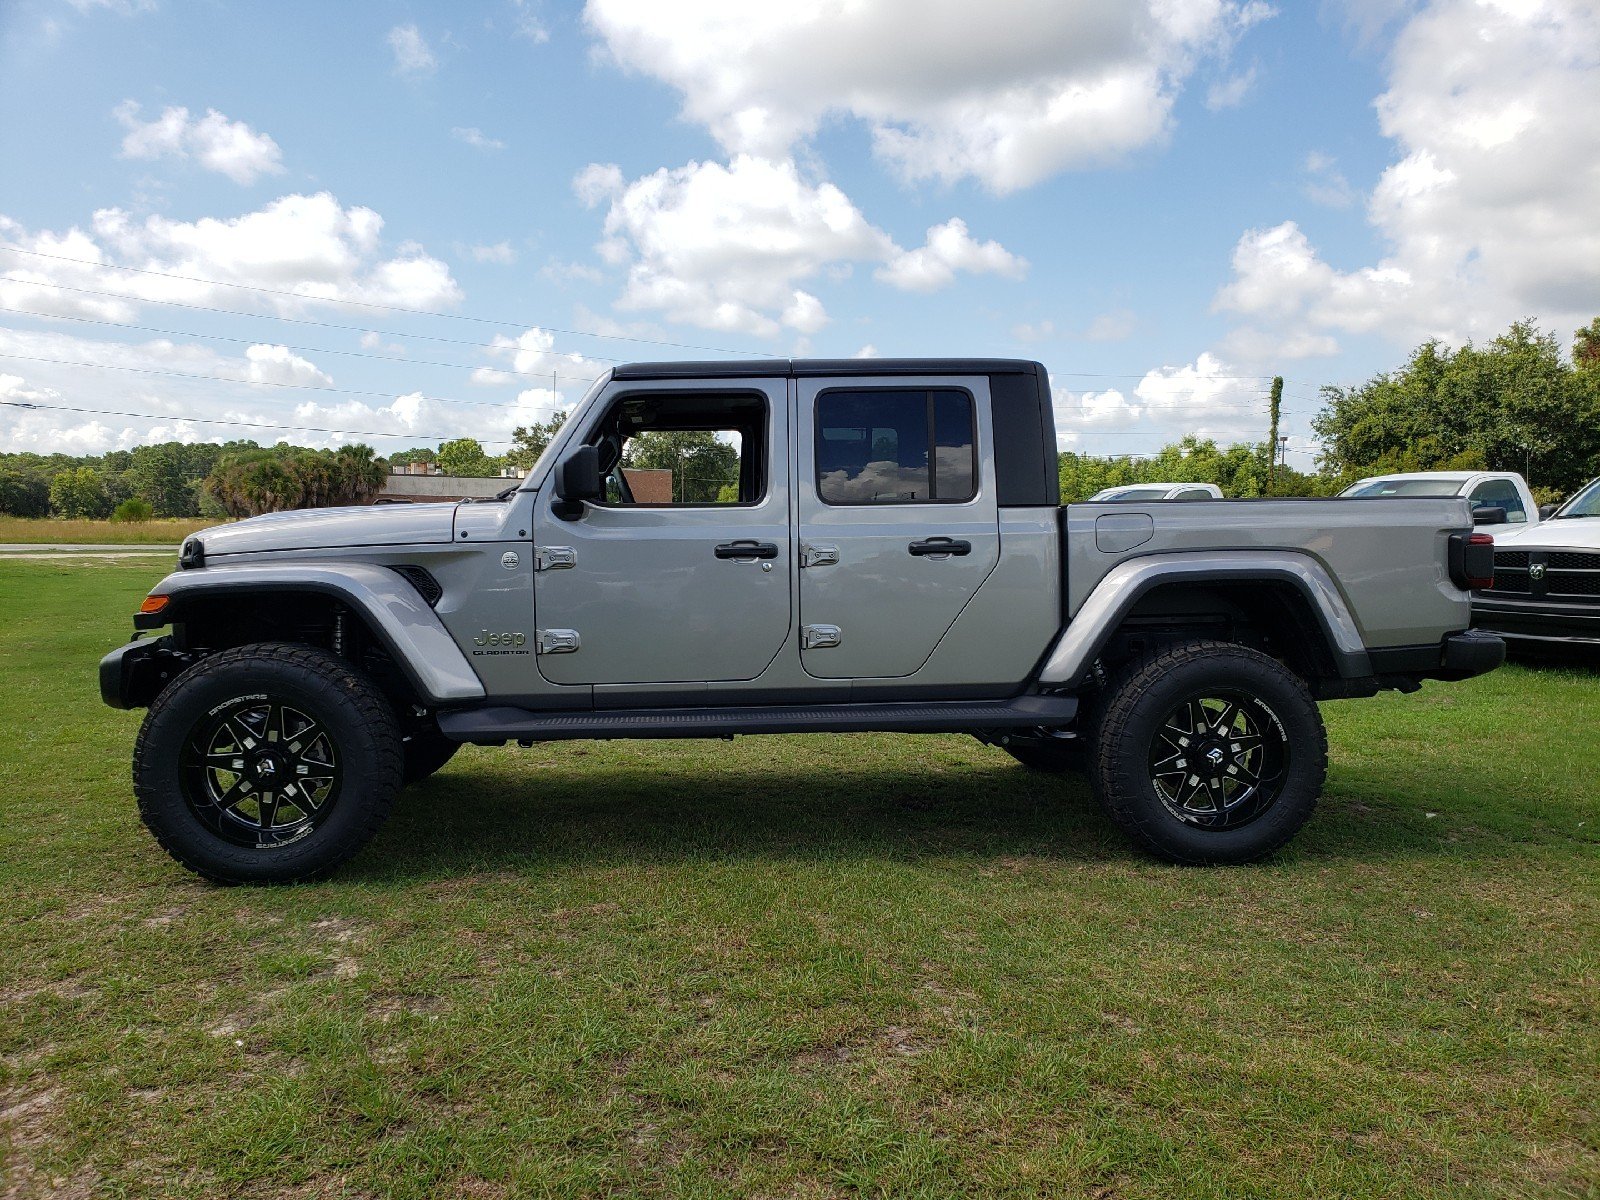 New 2020 Jeep Gladiator Overland 4D Crew Cab in Beaufort #J114703